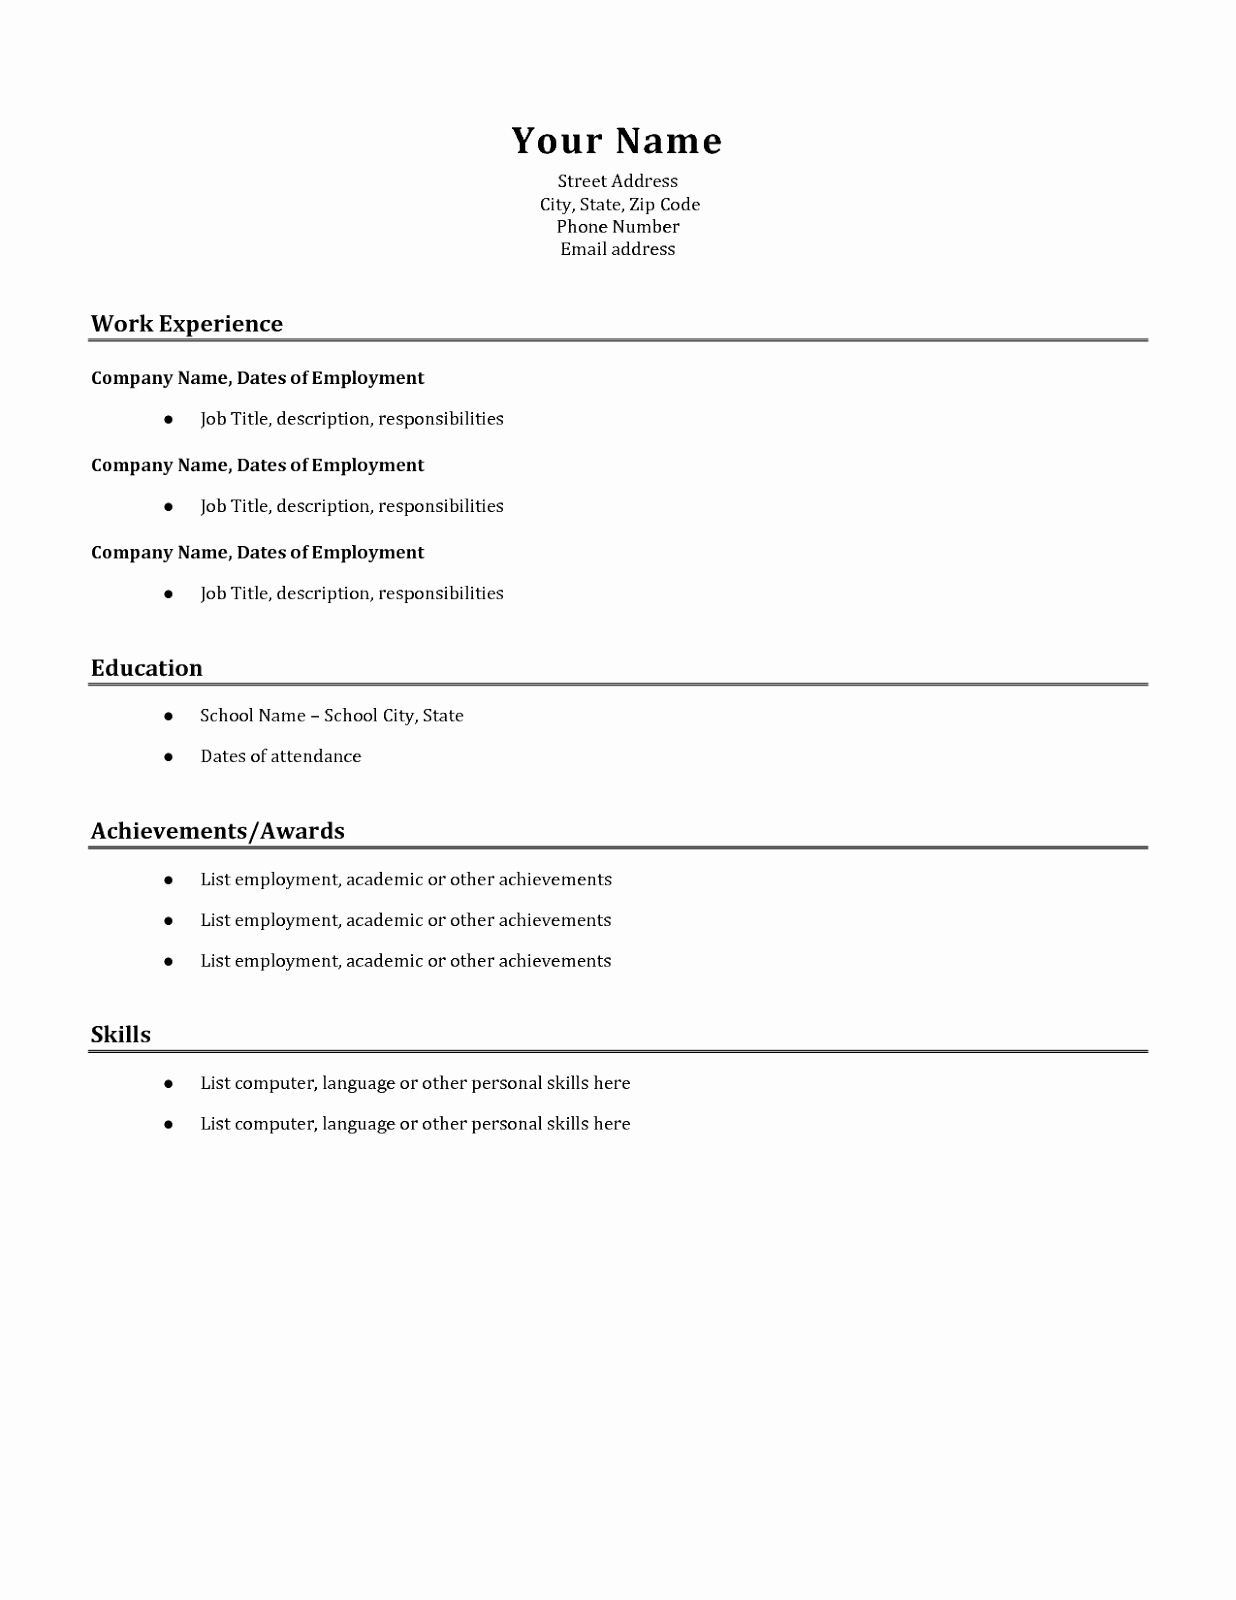 Sample Of A Simple Resume Lovely Sample Of Simple Resume